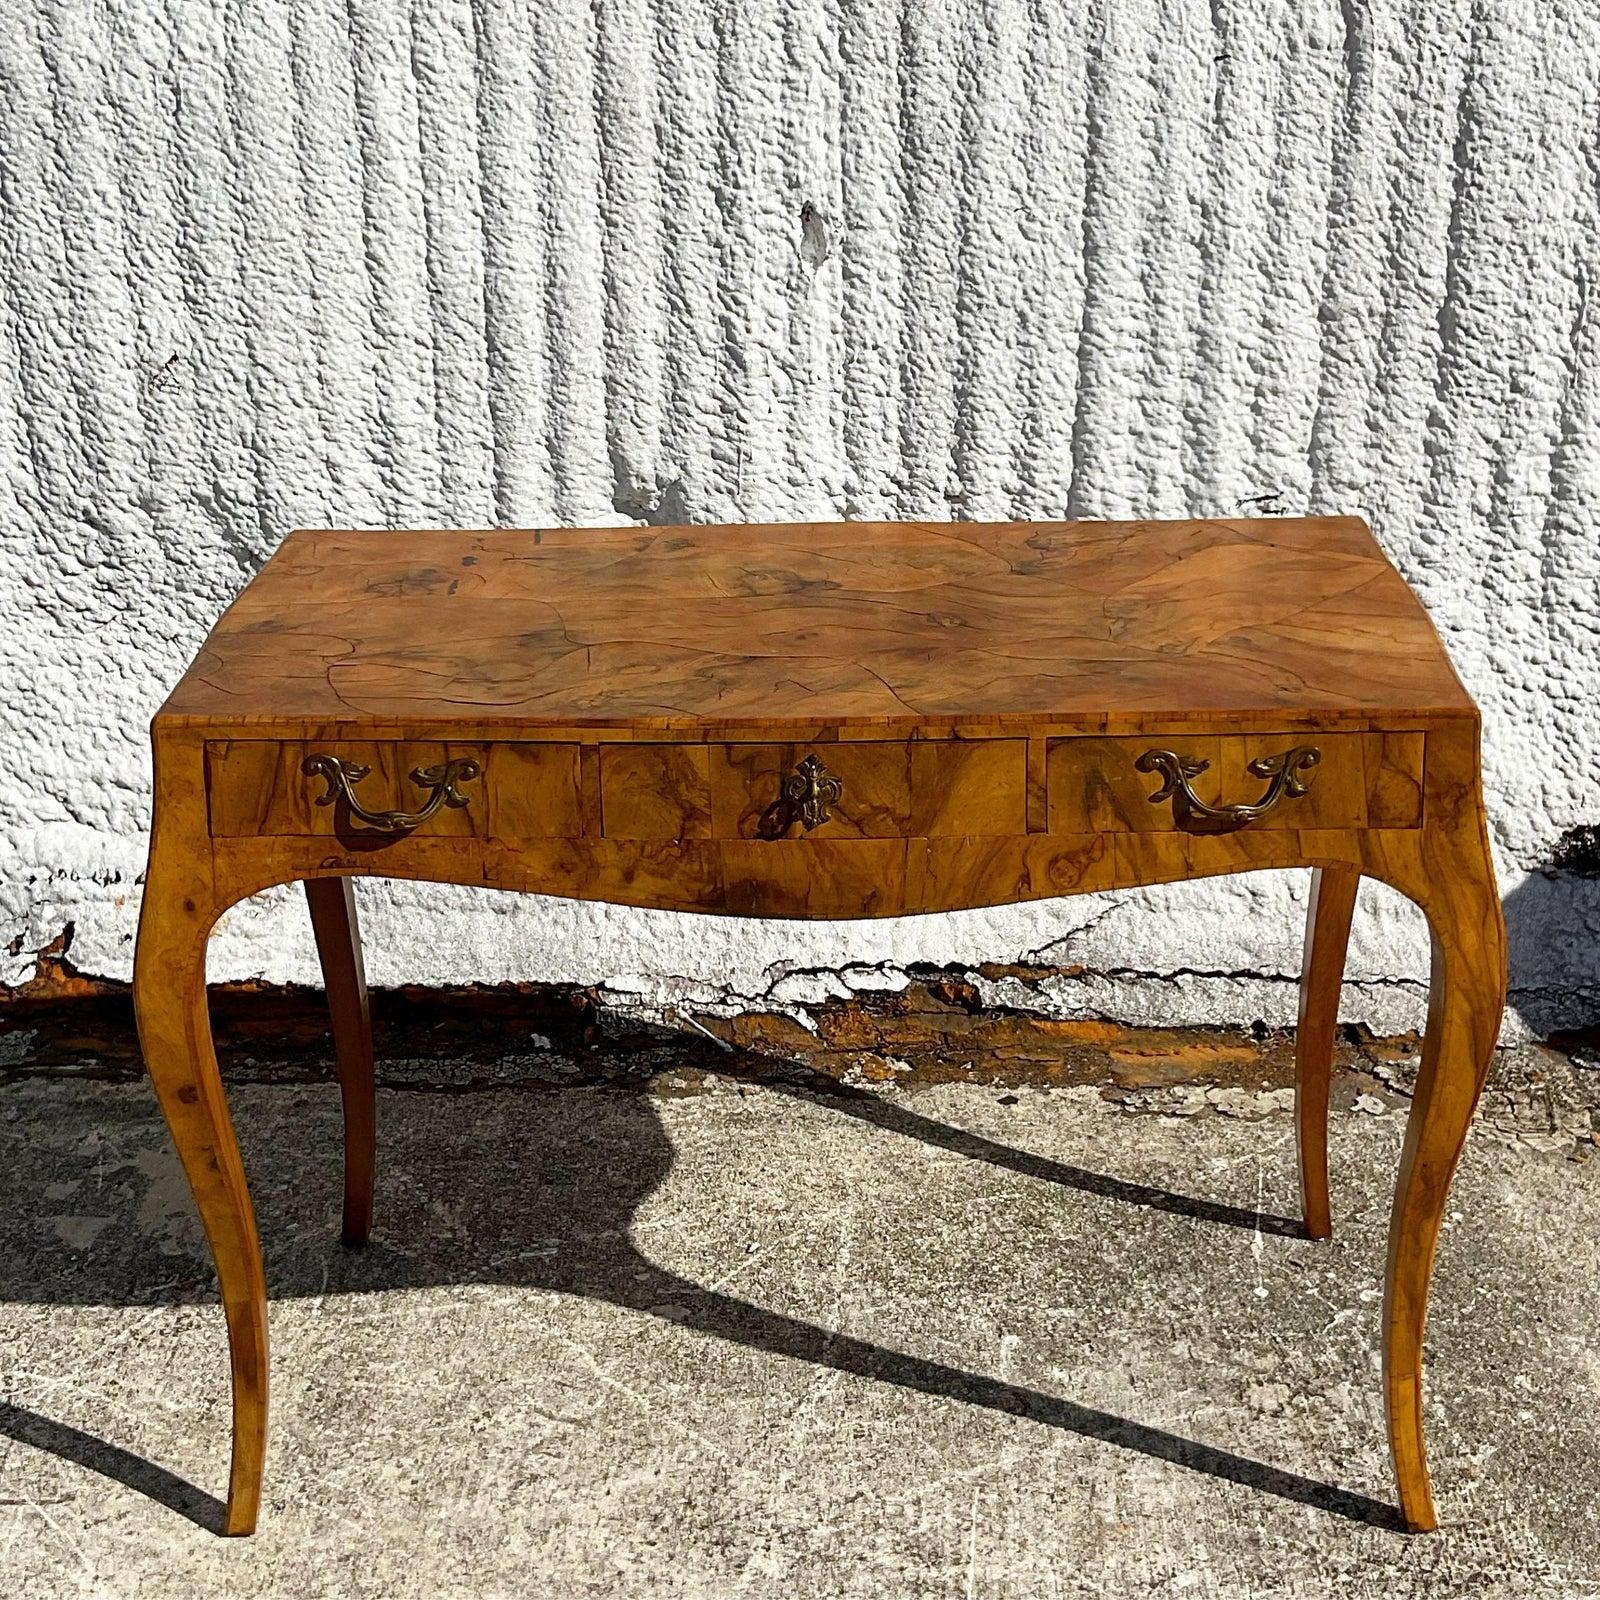 Fantastic vintage Olive burl wood writing desk. Beautiful wood grain detail and cabriolet leg. Made in Italy. Acquired from a Palm Beach estate.